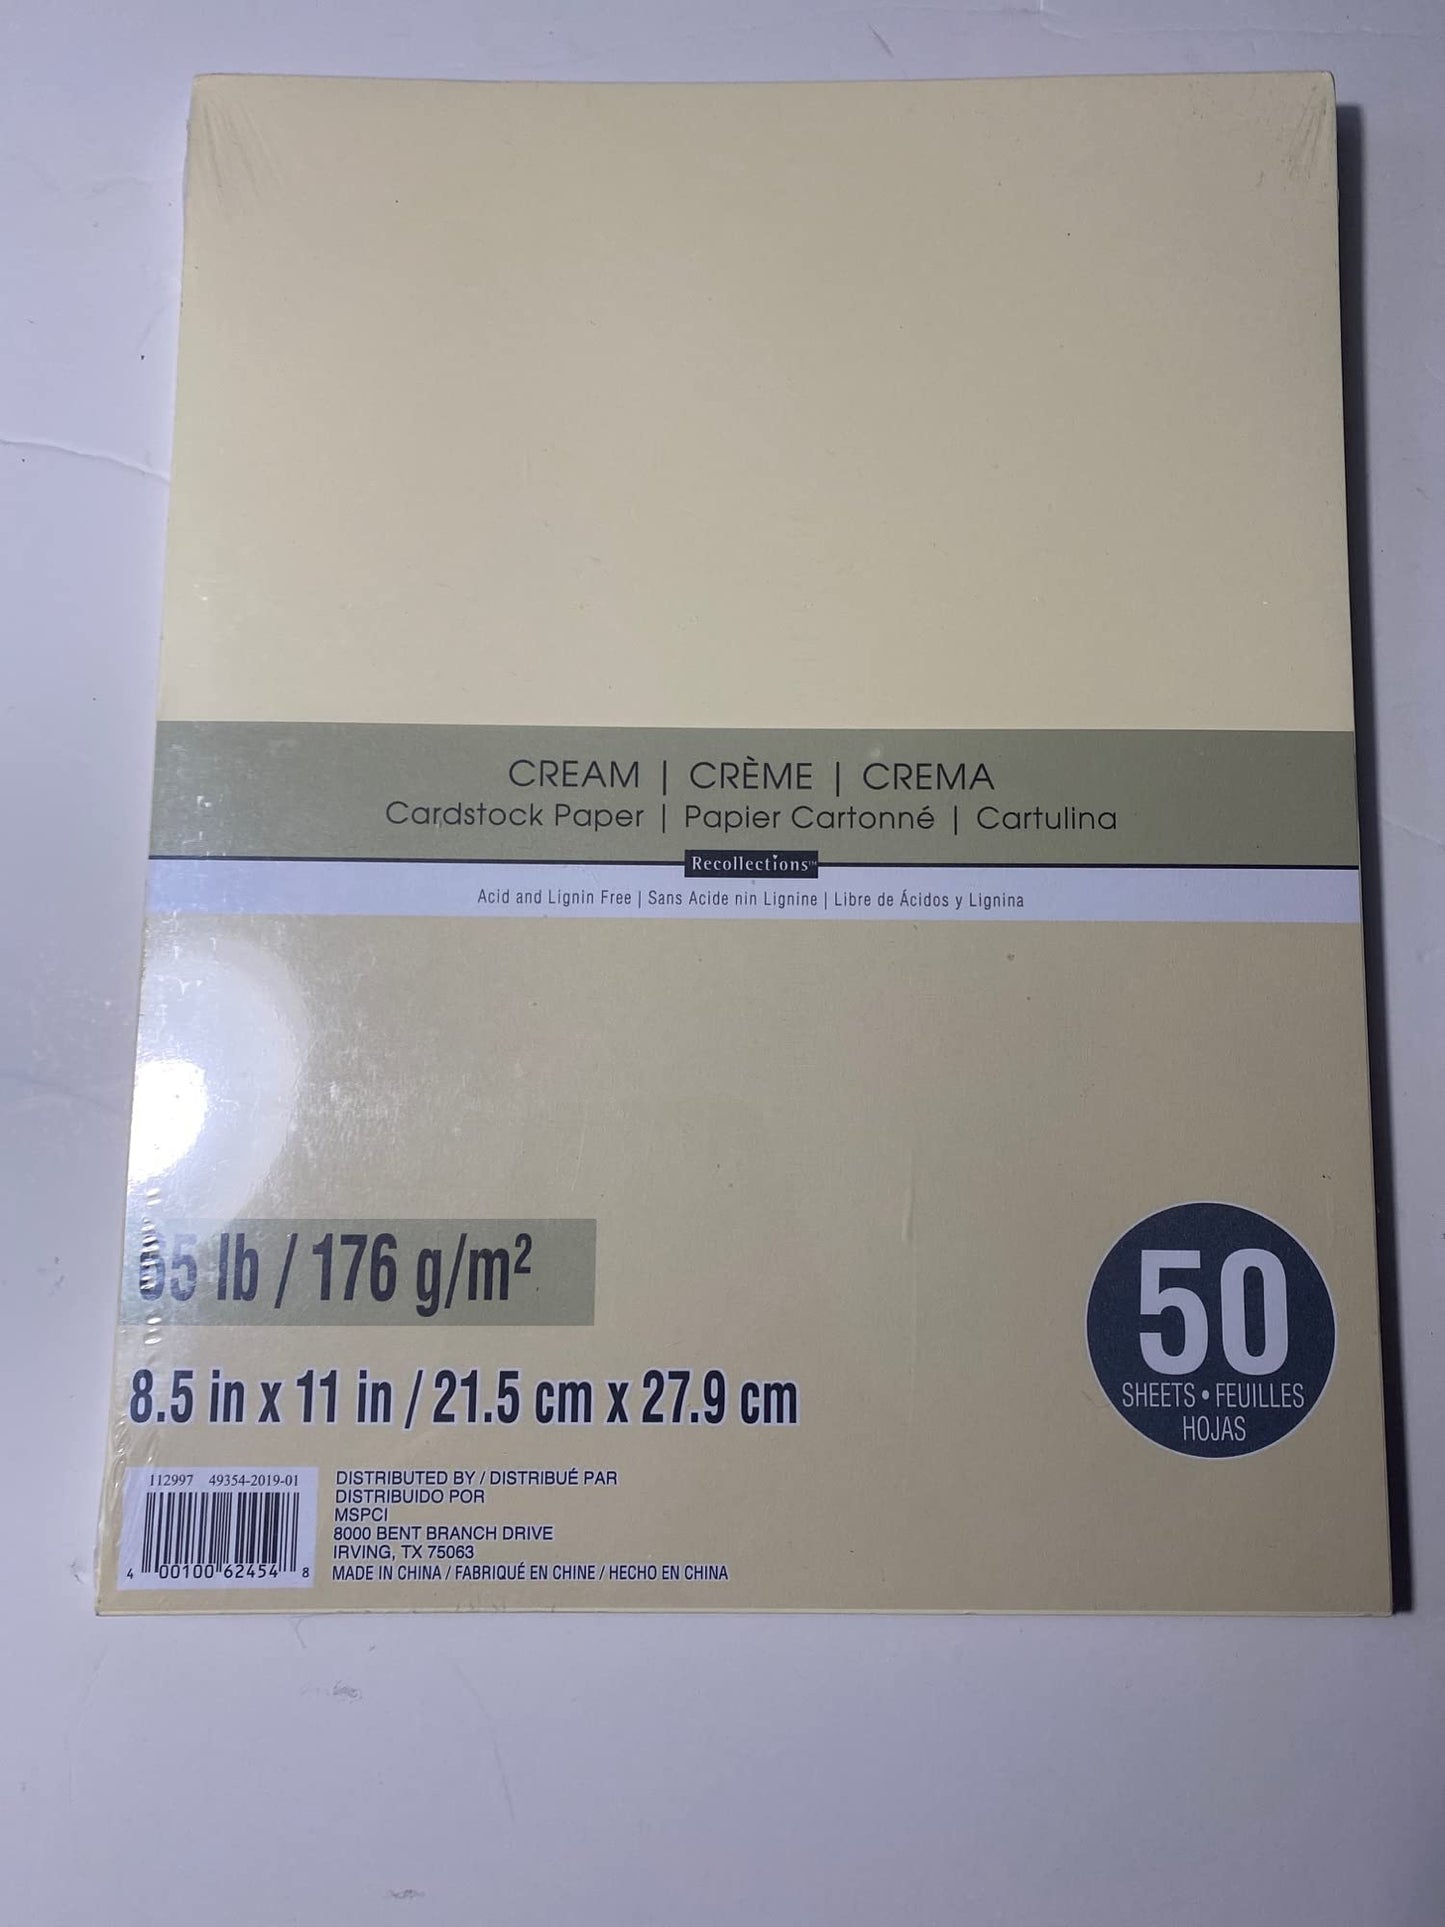 Recollections Cardstock Paper, 8 1/2 X 11 Cream - 50 Sheets